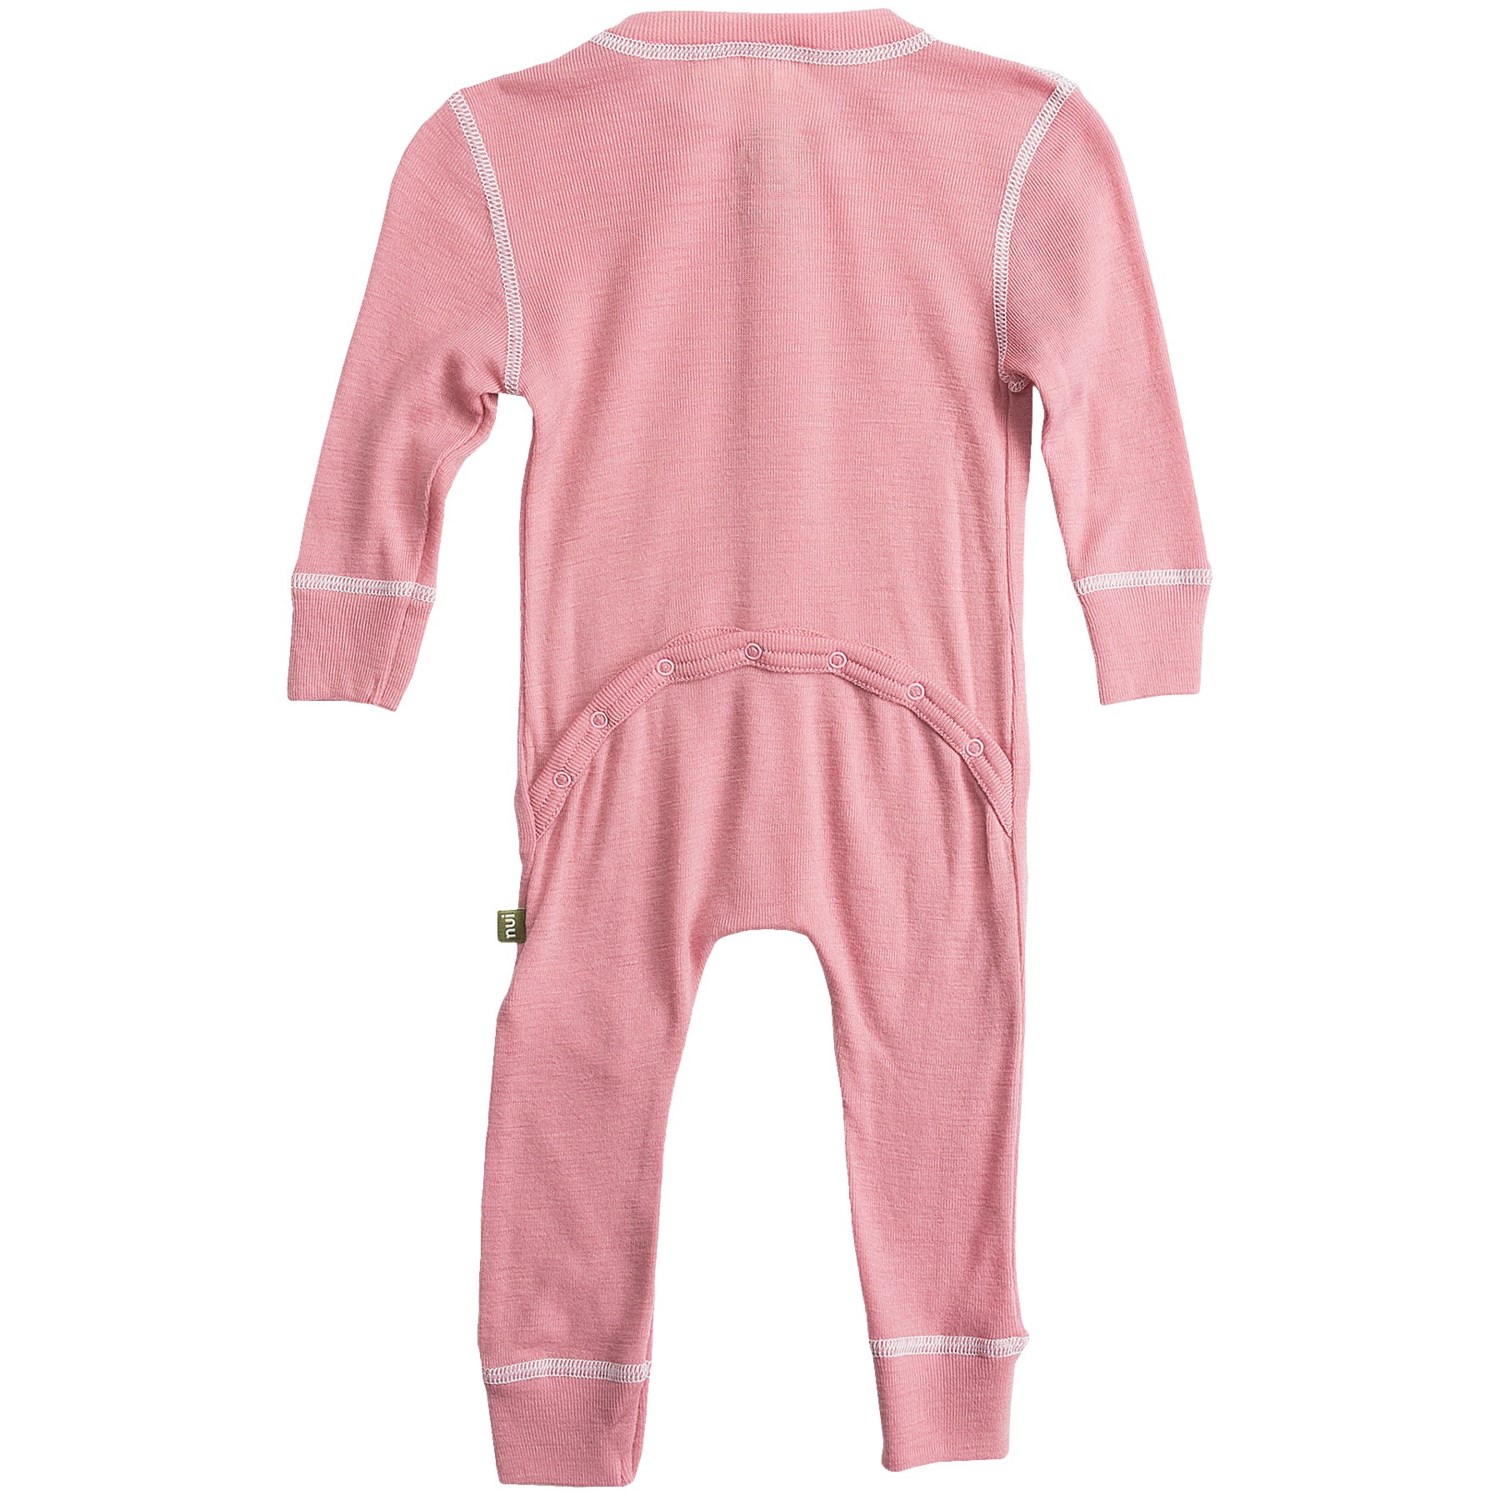 Nui Thermal Union Suit Pajamas (For Infants and Kids) 7563V - Save 35%